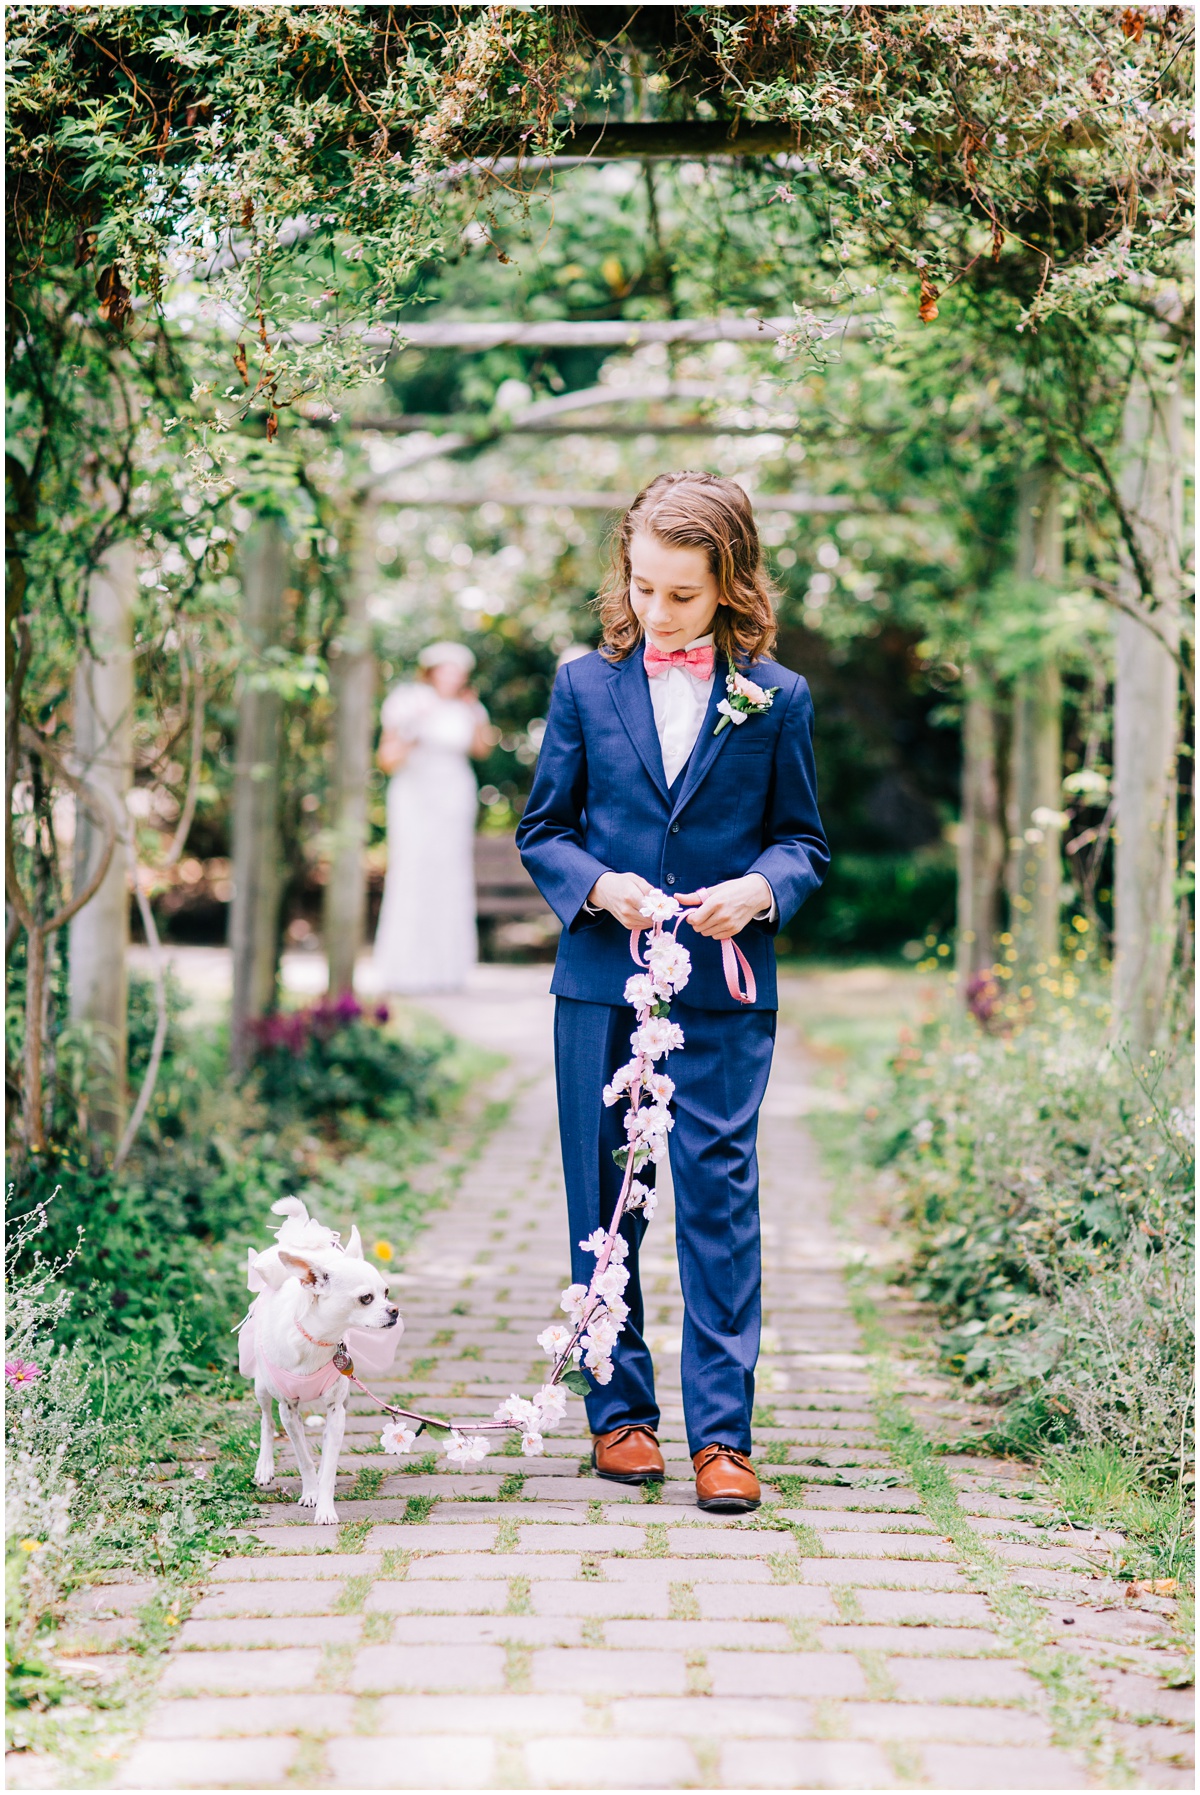 son and ring bearer dog wait for ceremony